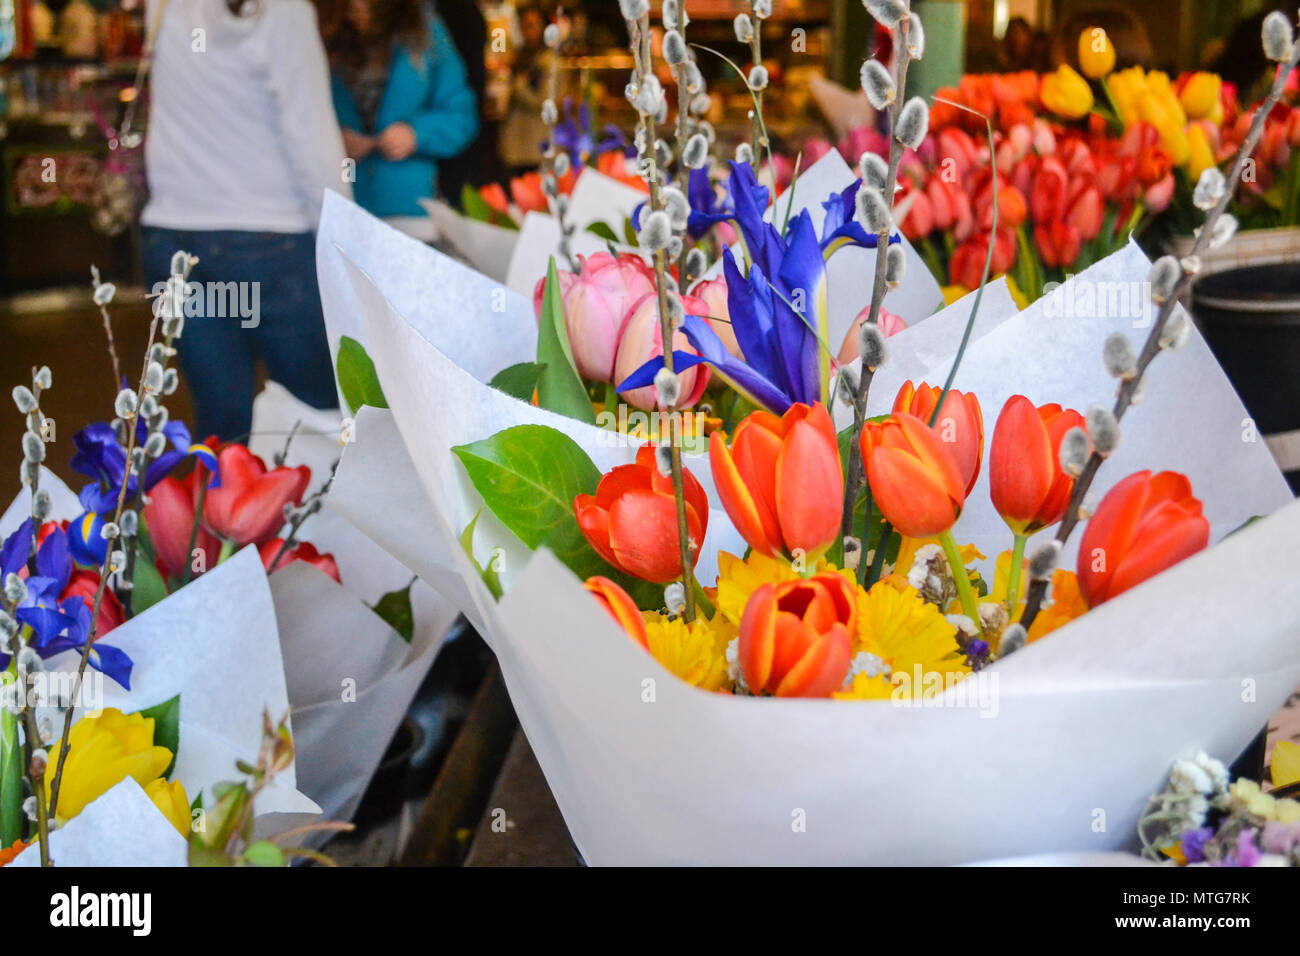 Tulips and Daffodils bloom at the flower market in downtown. Signs of spring, summer, and glorious nature come alive with bunches and bouquets. Stock Photo